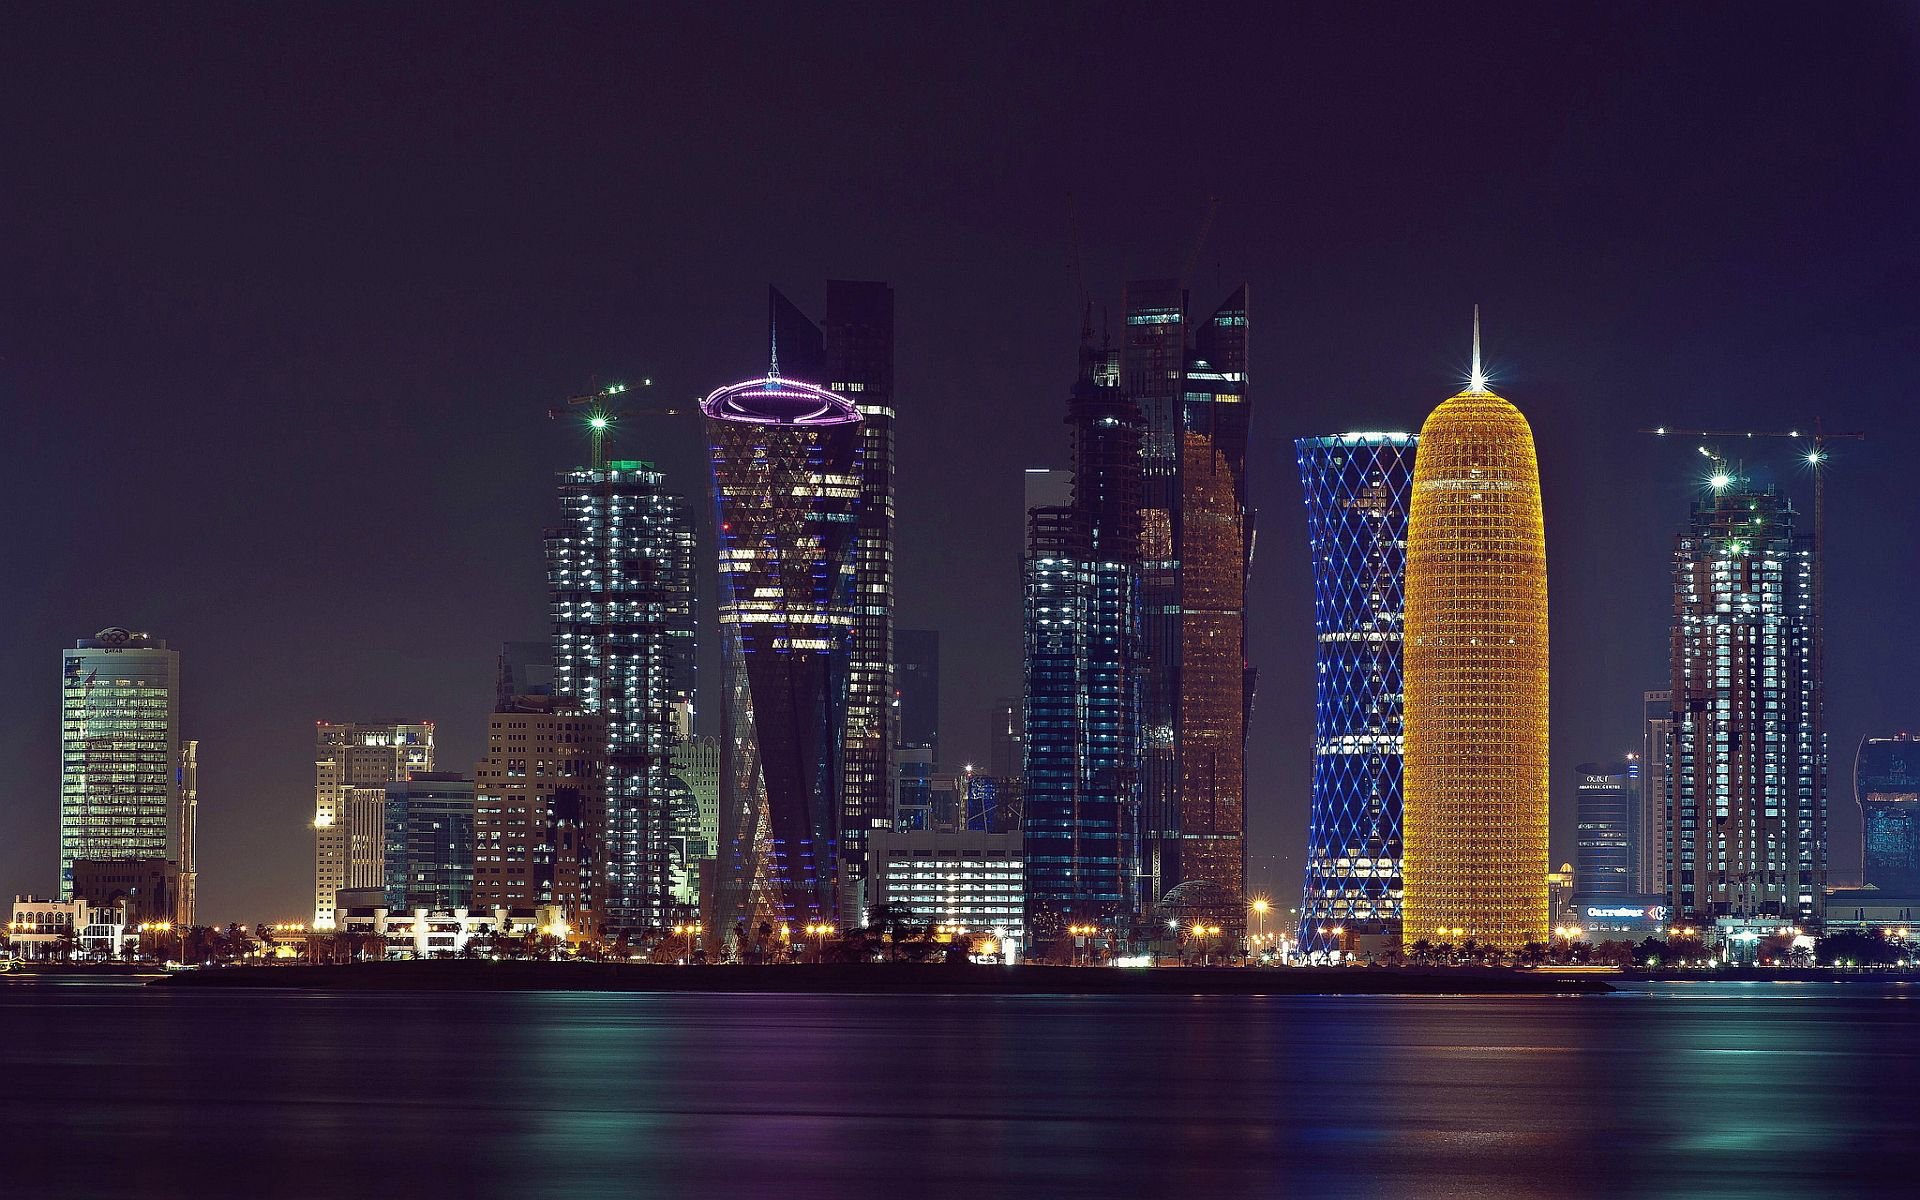 doha wallpapers, photos and desktop backgrounds up to 8K [7680x4320